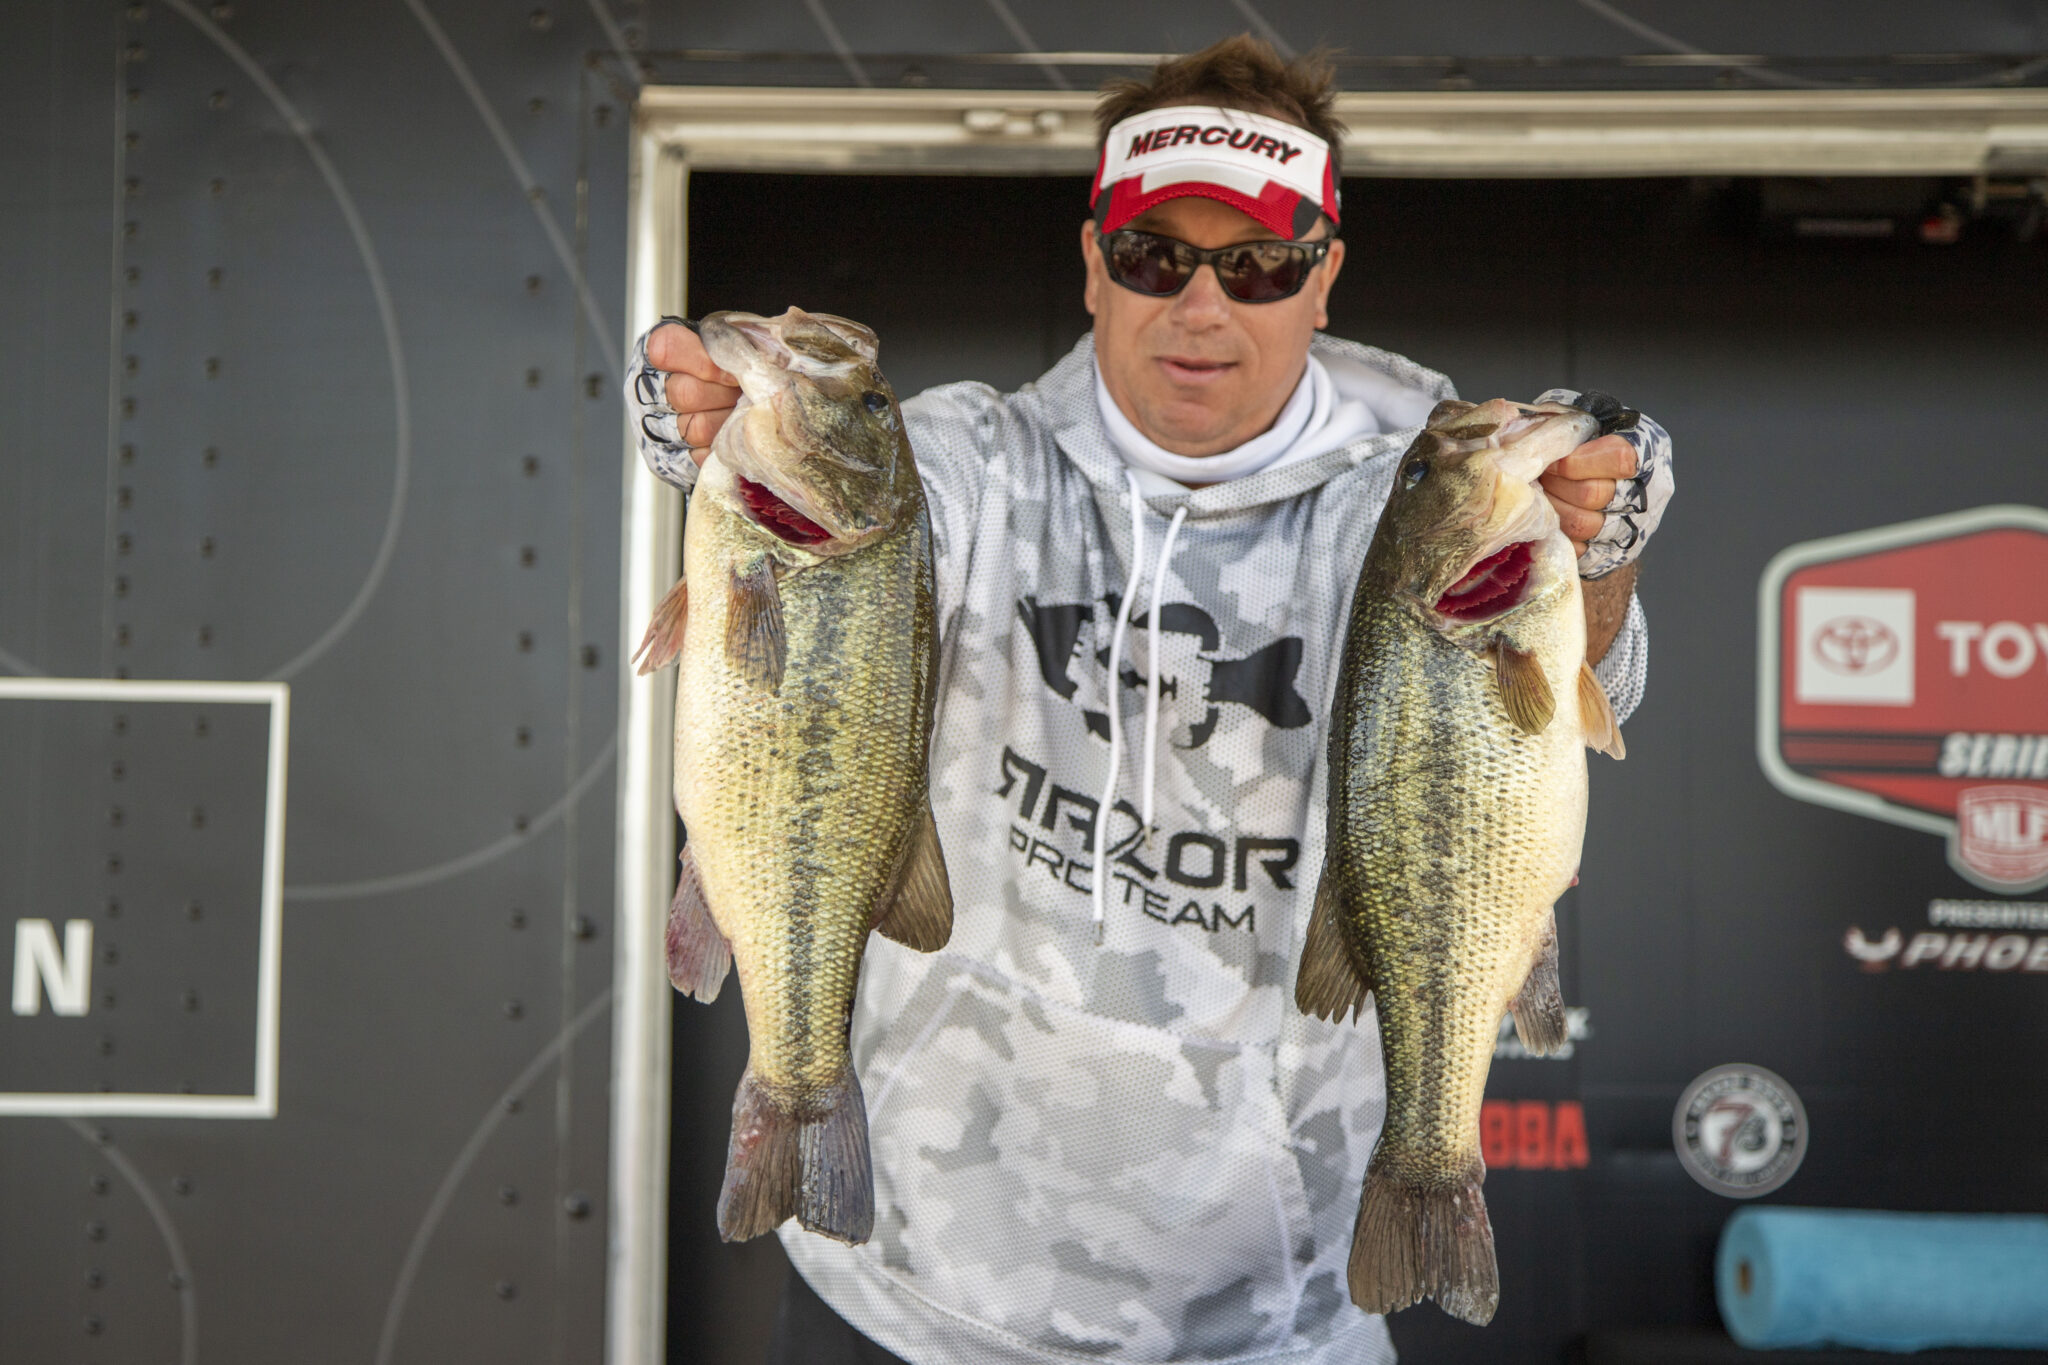 Breeden closes it out in style on Grand Lake - Major League Fishing